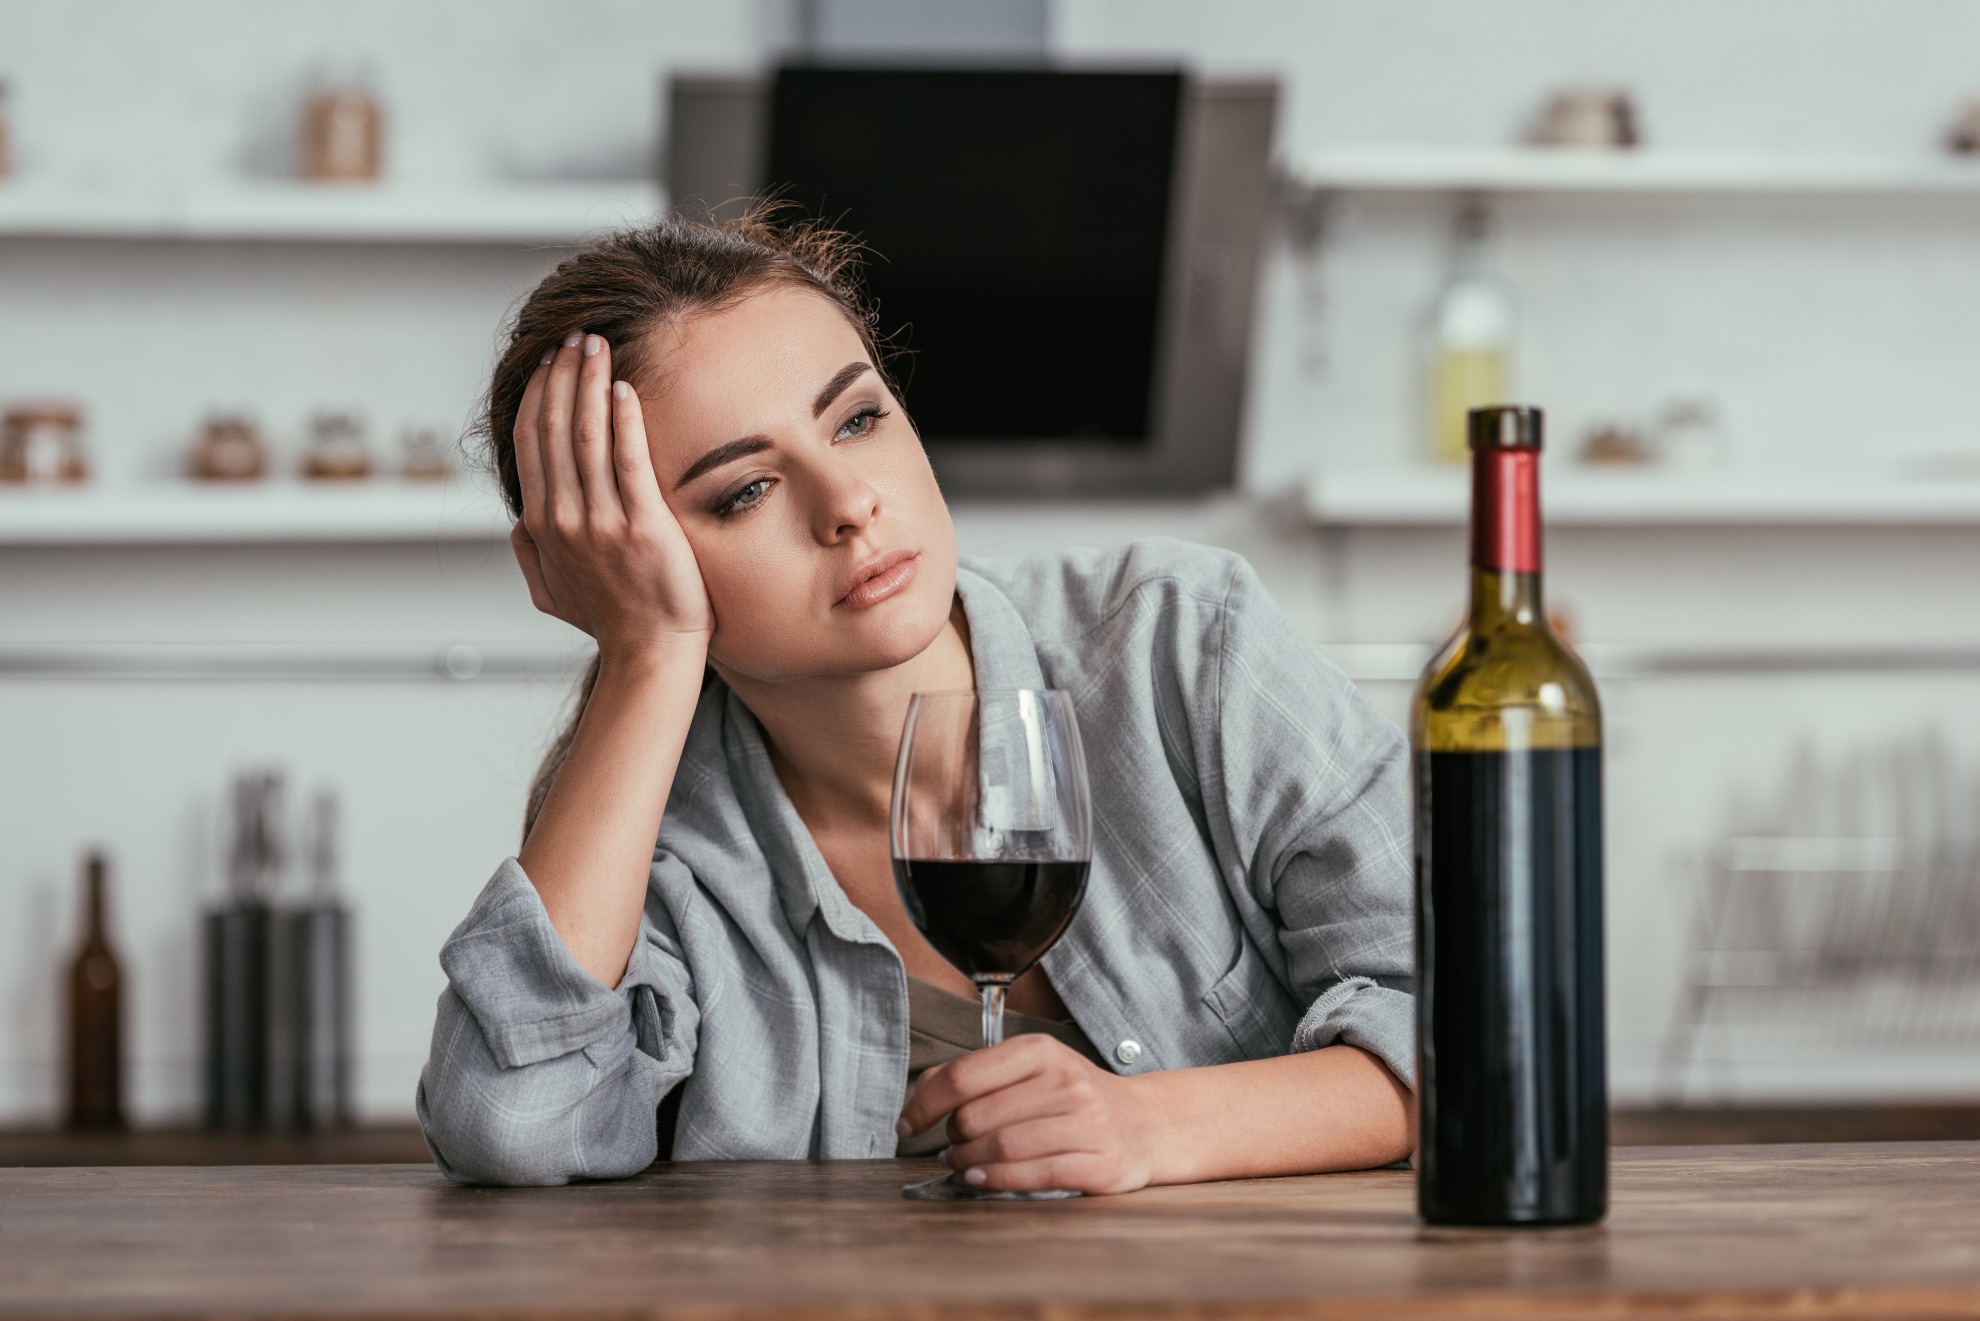 Woman Without The Self-Control For Dry July Summons Willpower To Feel Guilty About Every Drink